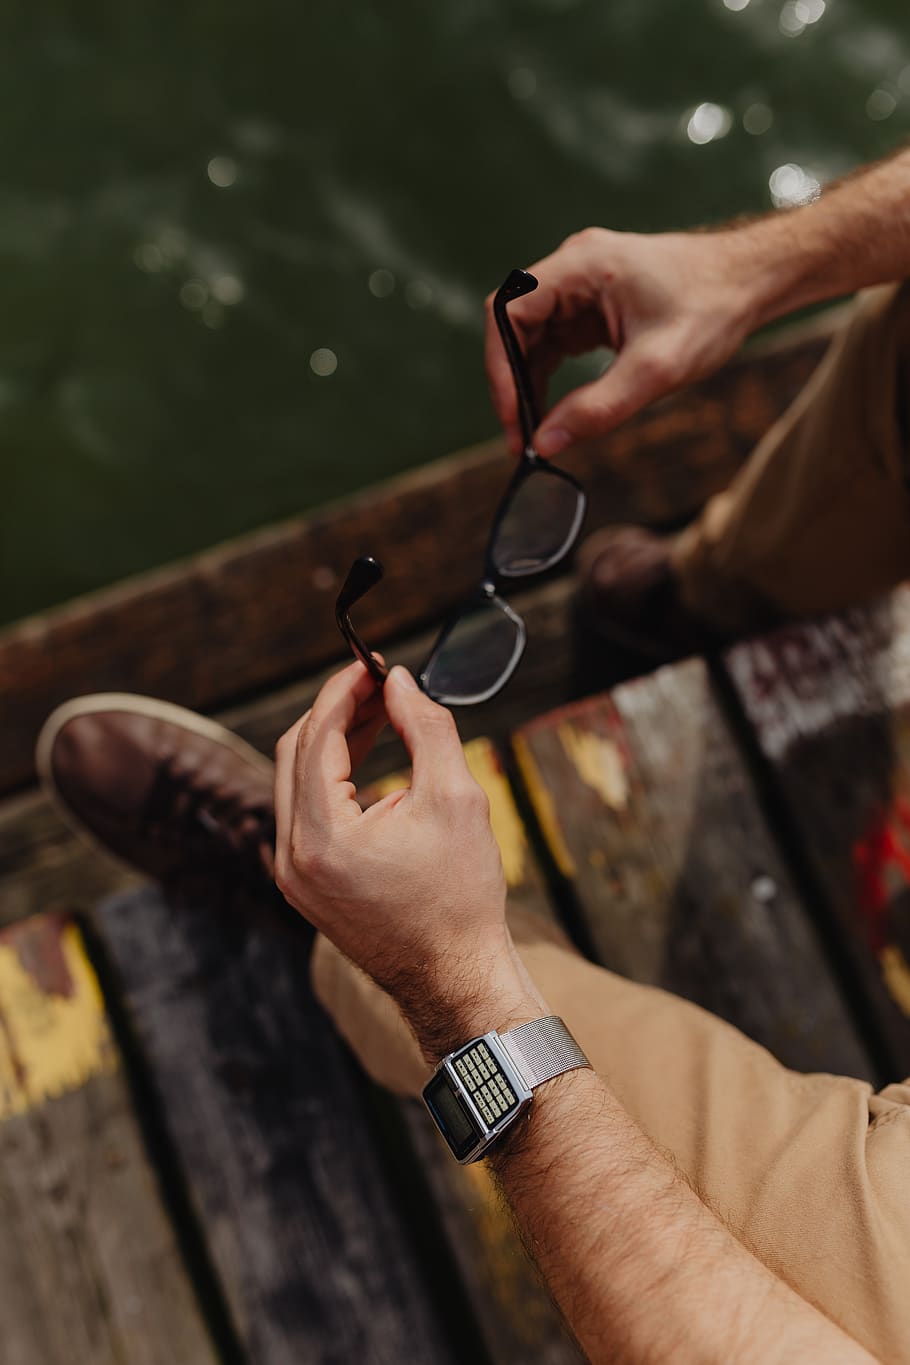 vintage, hands, man, male, watch, stylish, casio, time, wirst, glasses